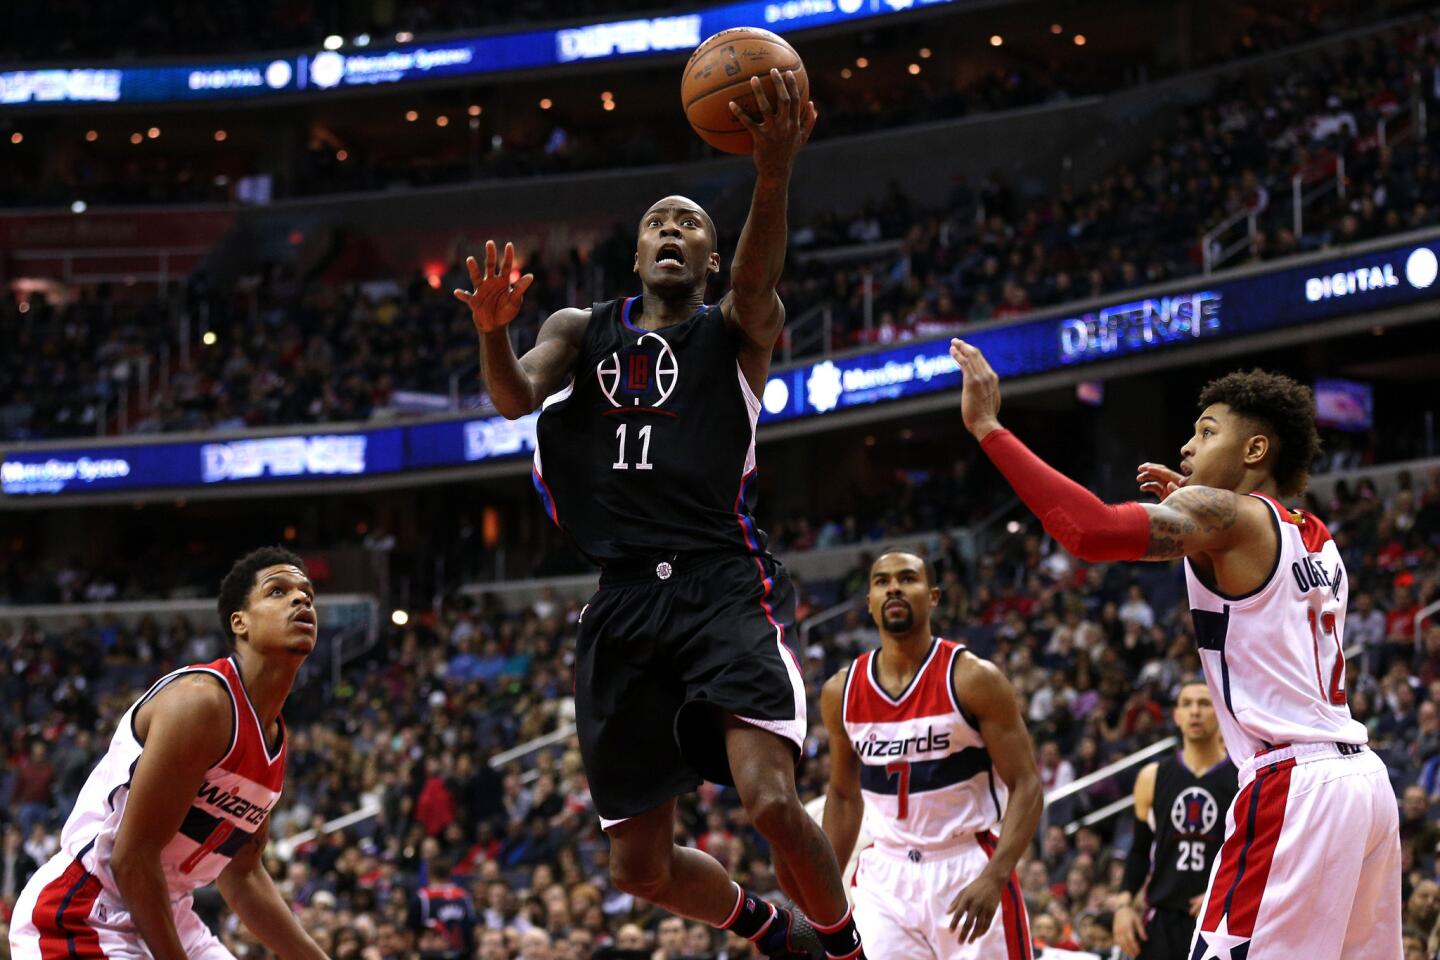 Five takeaways from the Clippers' 108-91 win over the Wizards